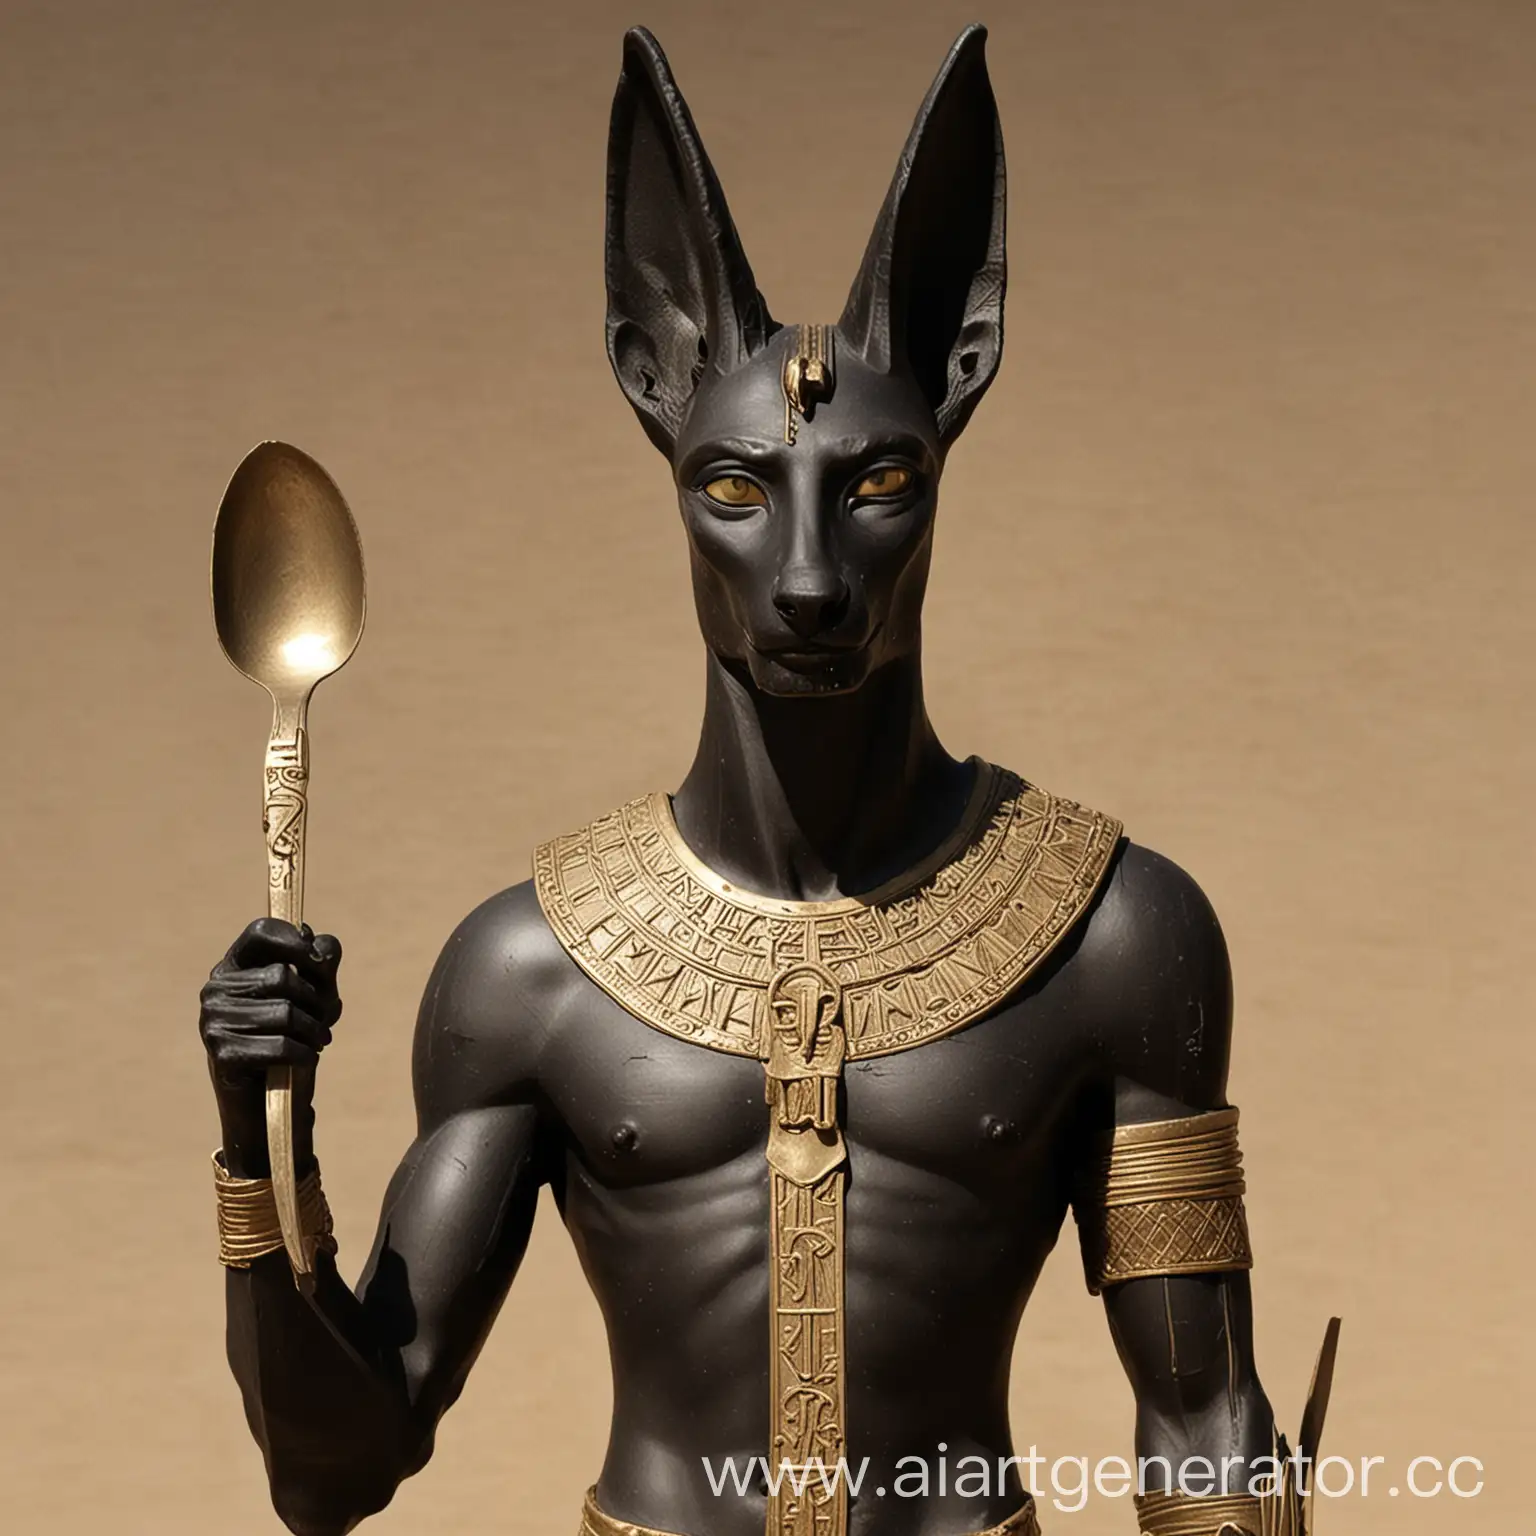 Anubis-Holding-a-Spoon-in-Sicily